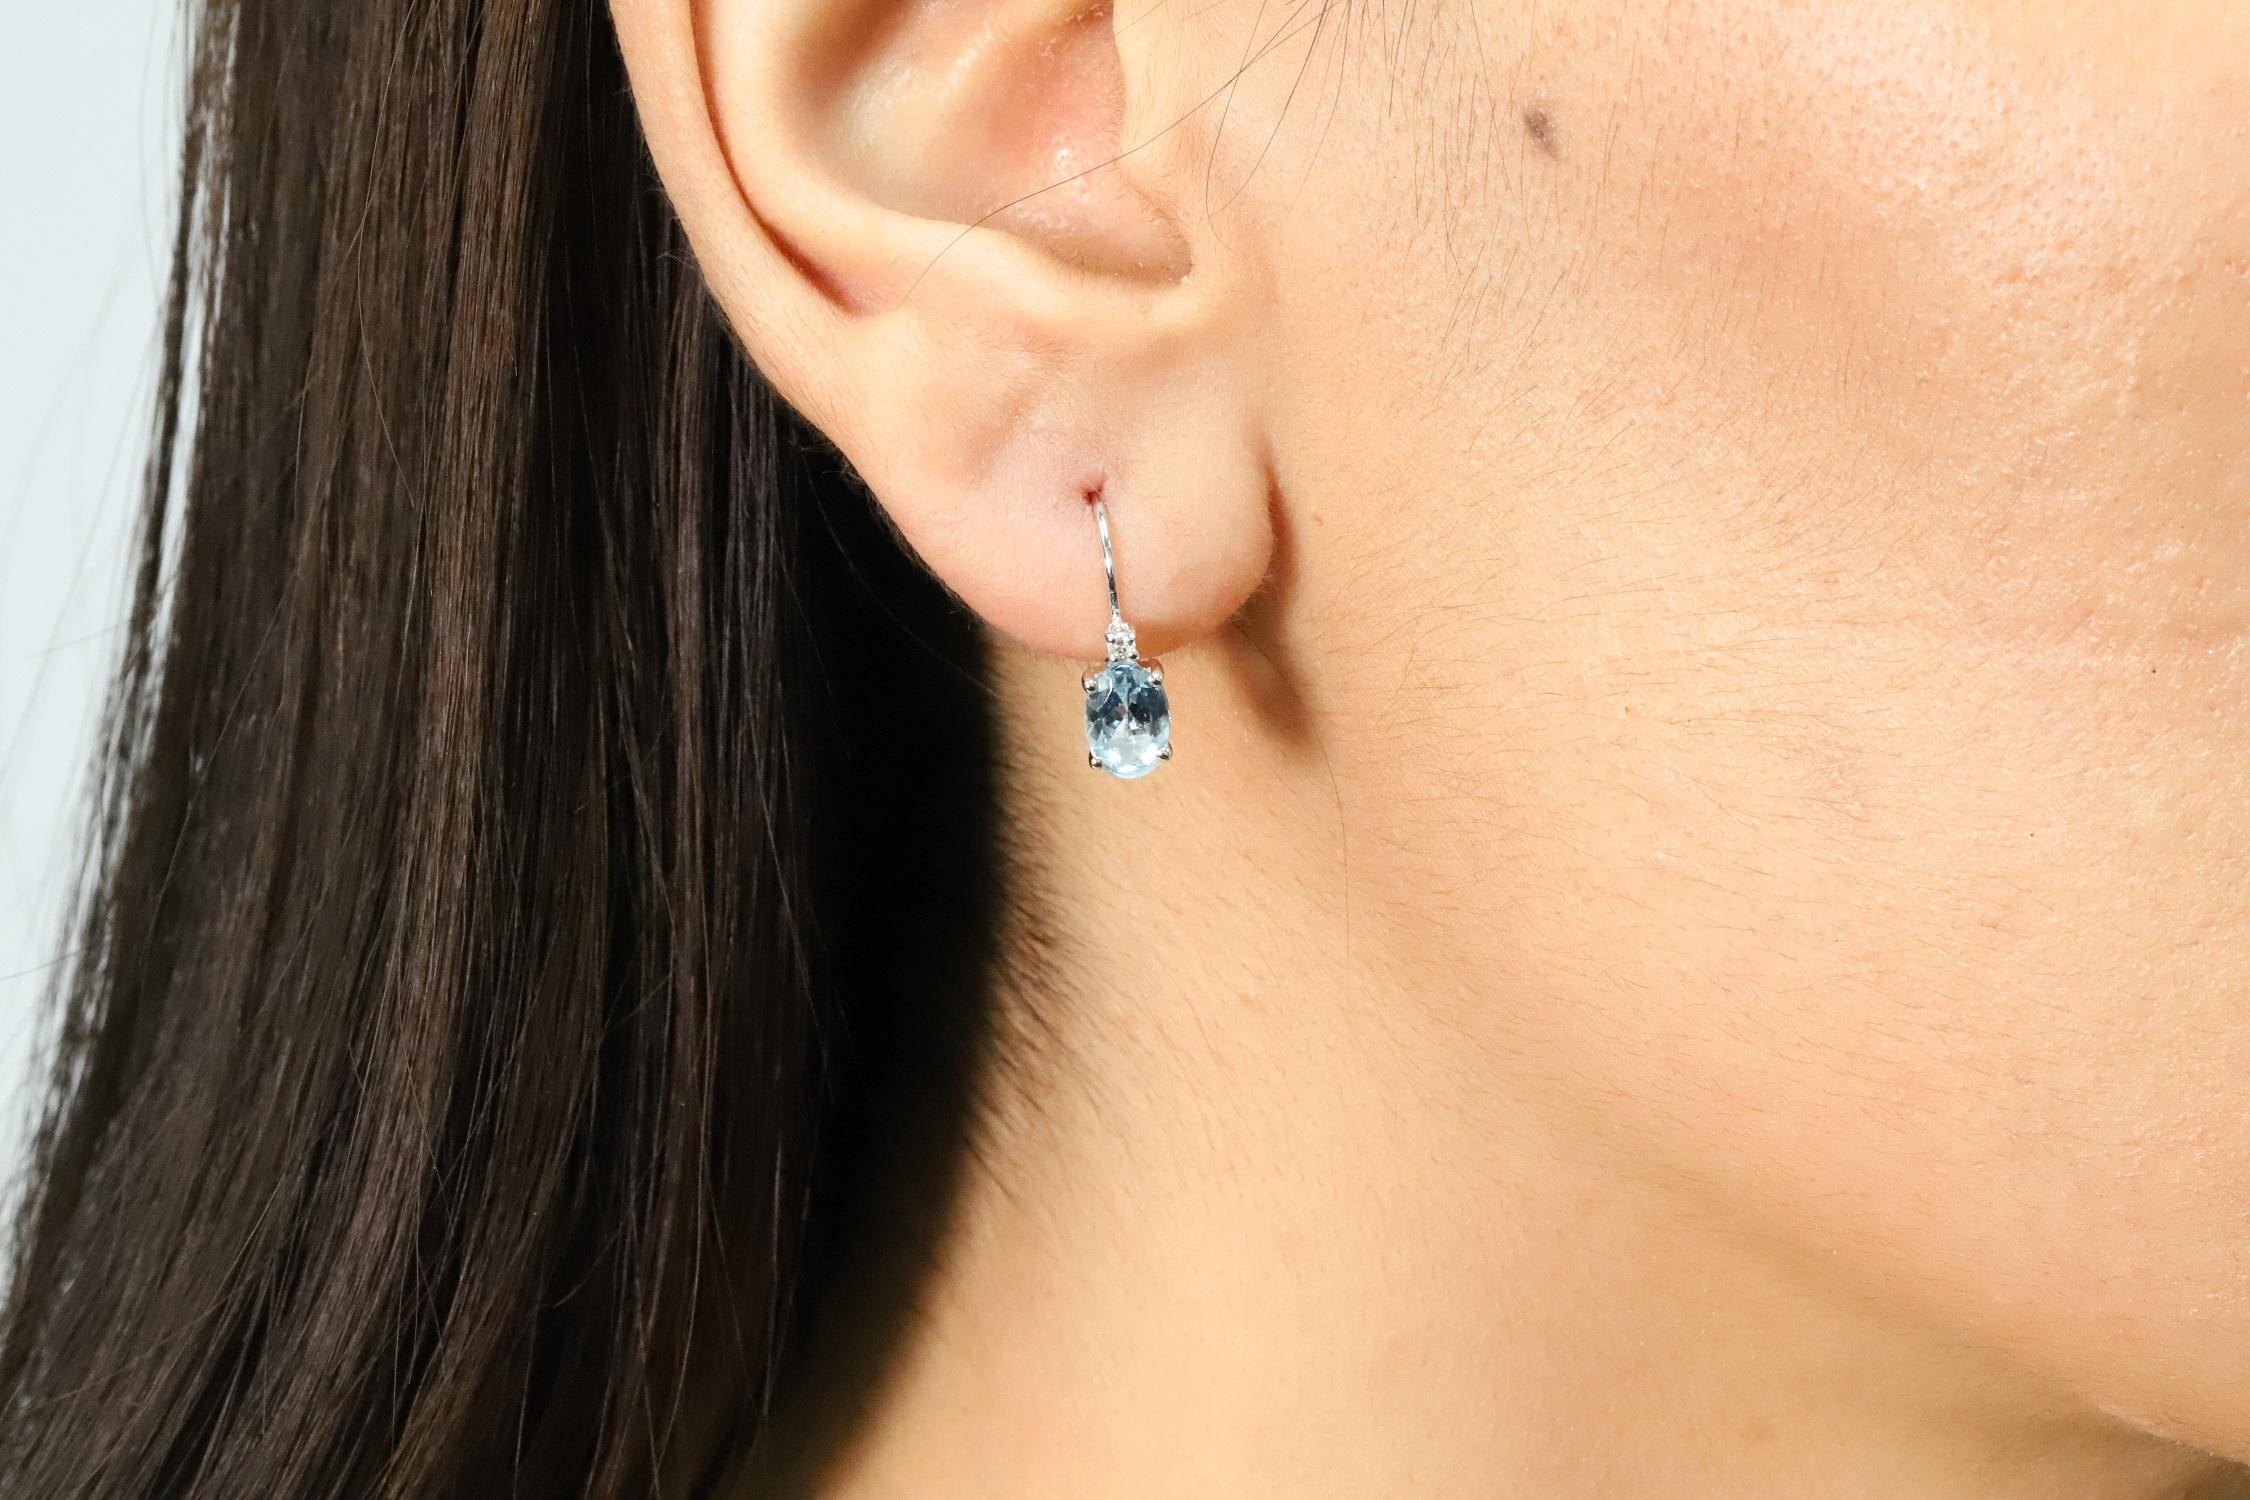 Decorate yourself in elegance with this Earring is crafted from 14K White Gold by The Loop Club Earring. This Earring is made up of 5X7 Oval-Cut prong setting Genuine Aquamarine (2 pcs) 1.48 Carat and Round-Cut prong setting Diamond (2 pcs) 0.05